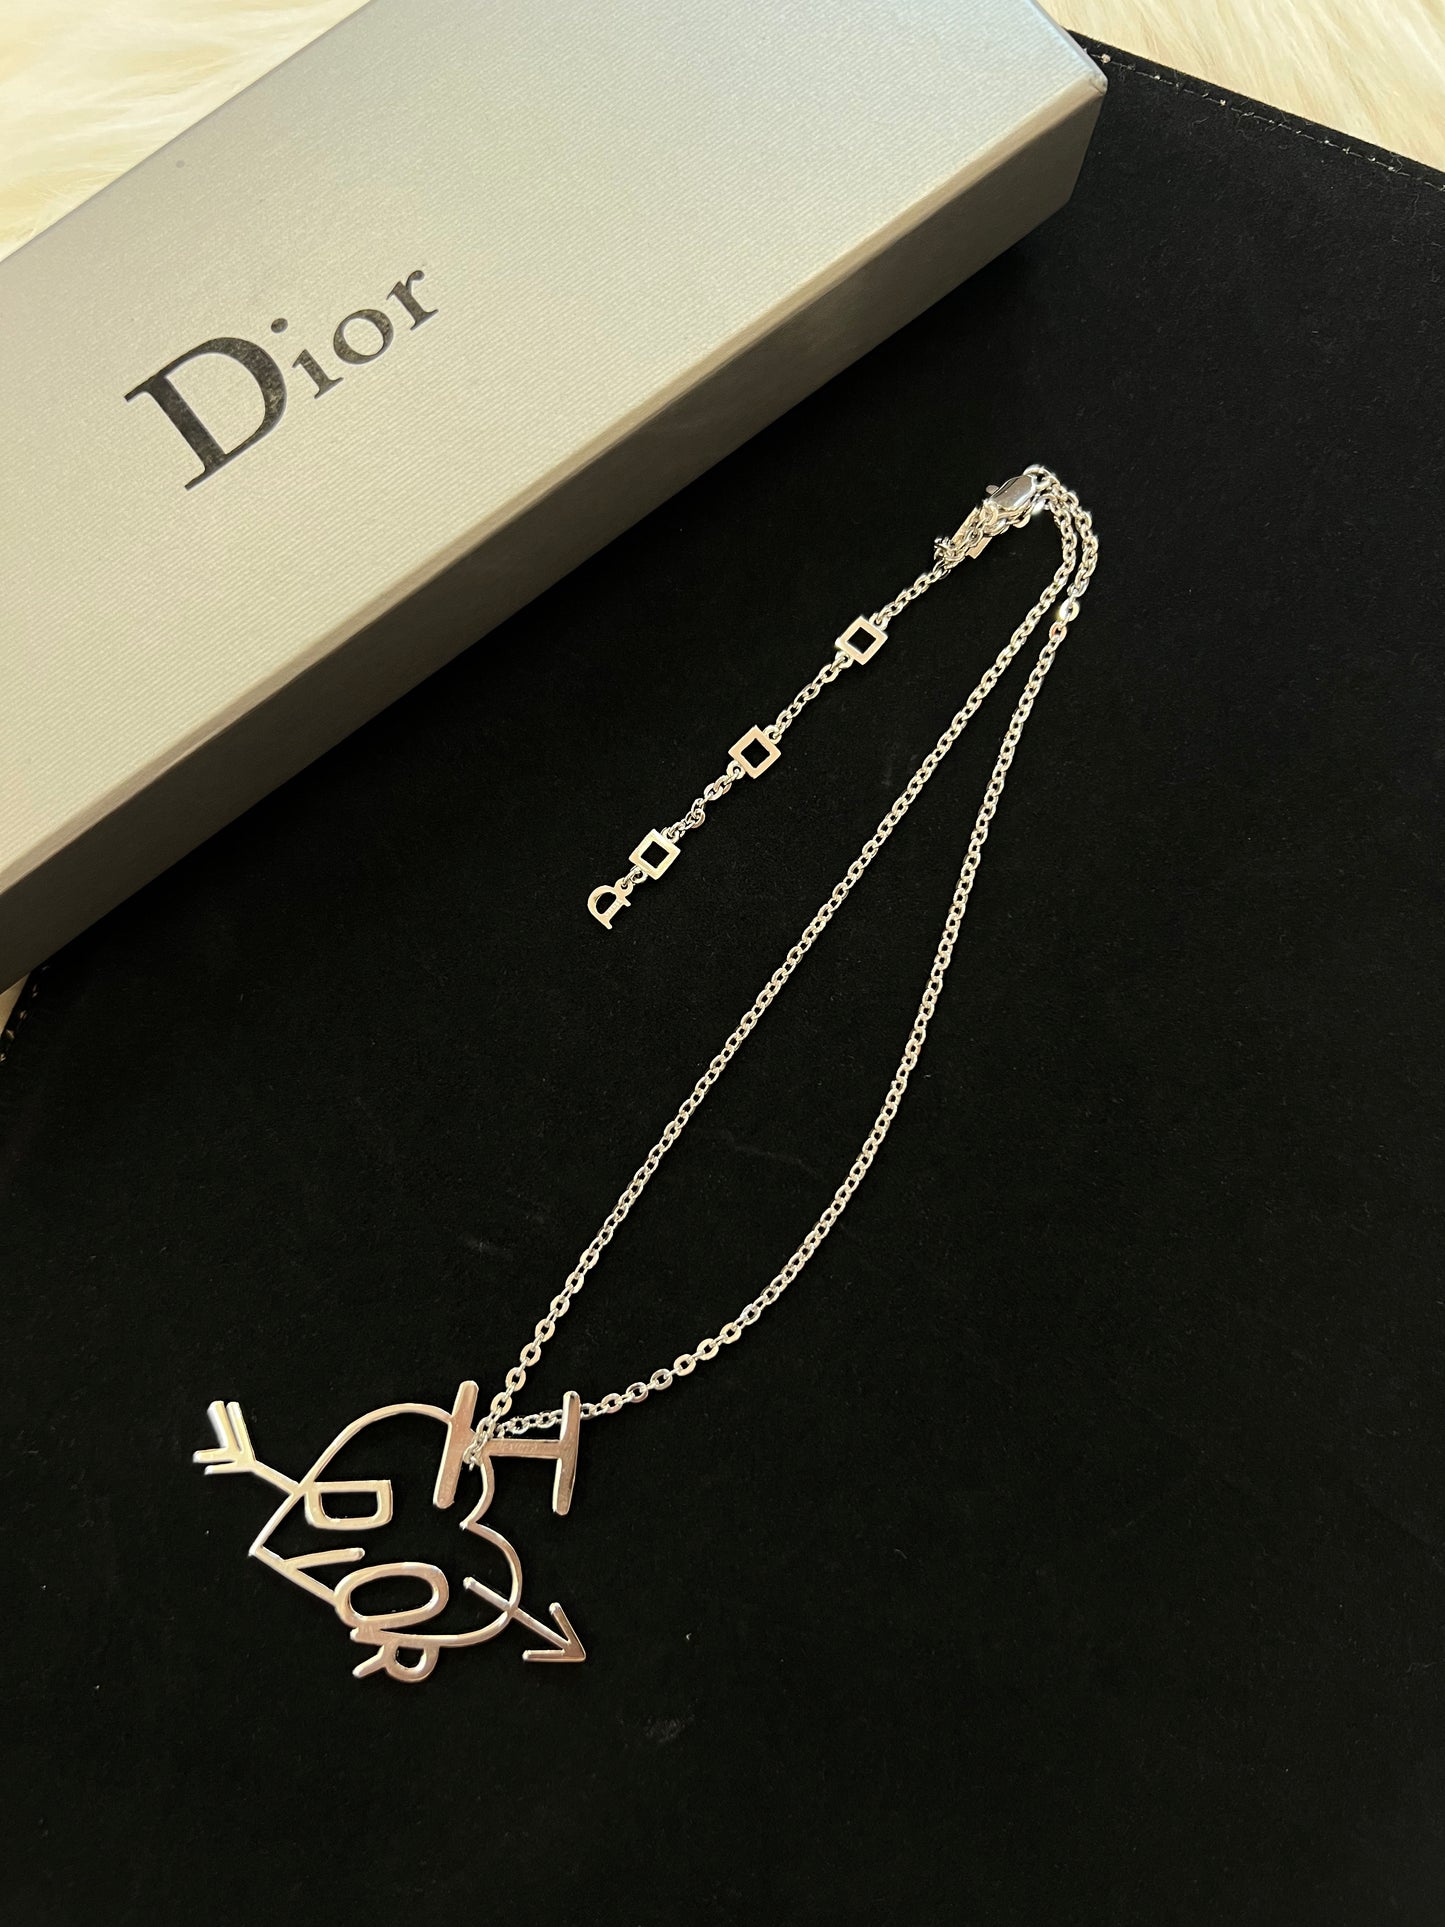 Pre-loved CHRISTIAN DIOR HEART AND ARROW NECKLACE 2004